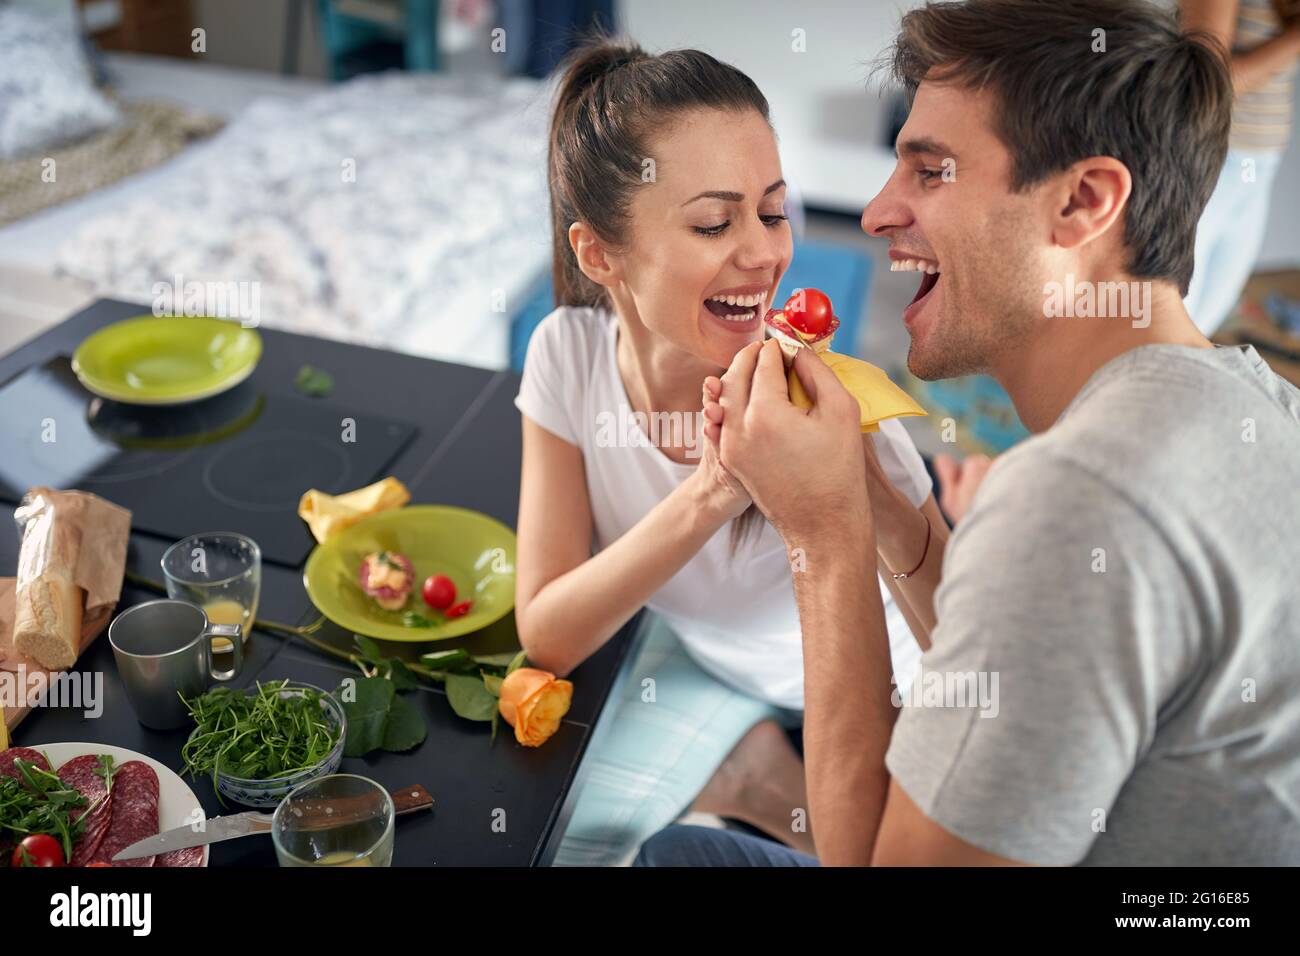 A young couple enjoys feeding each other while having a breakfast in a cheerful atmosphere at home. Love, together, breakfast, home Stock Photo